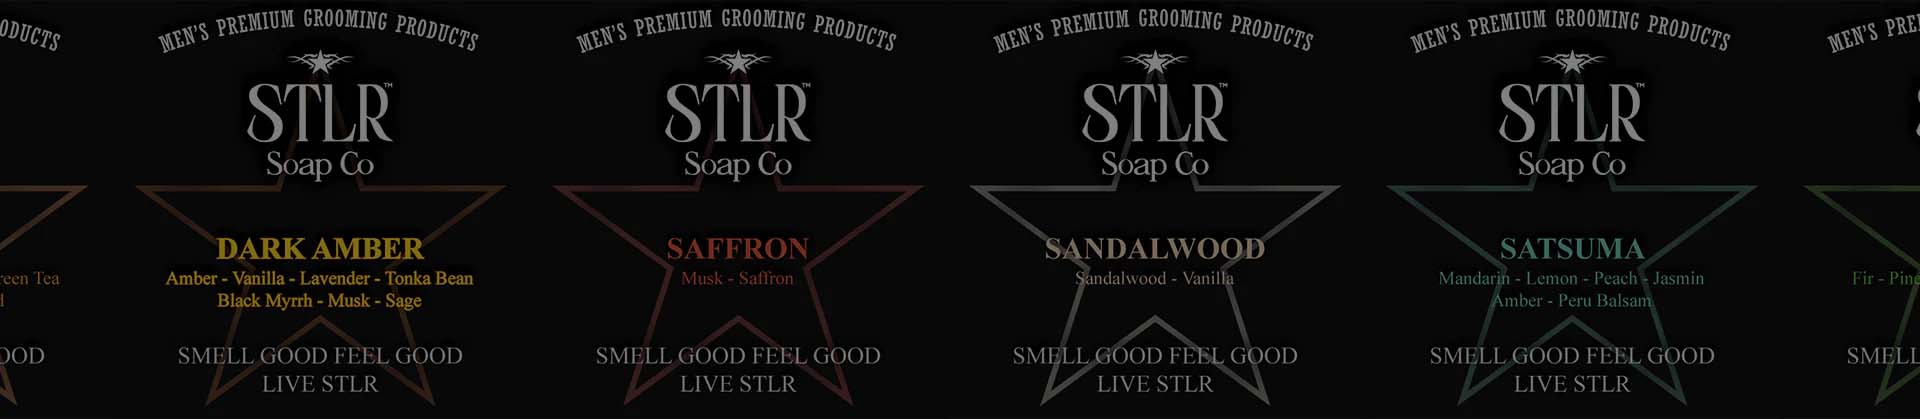 An image of STLR soap product labels distributed horizontally